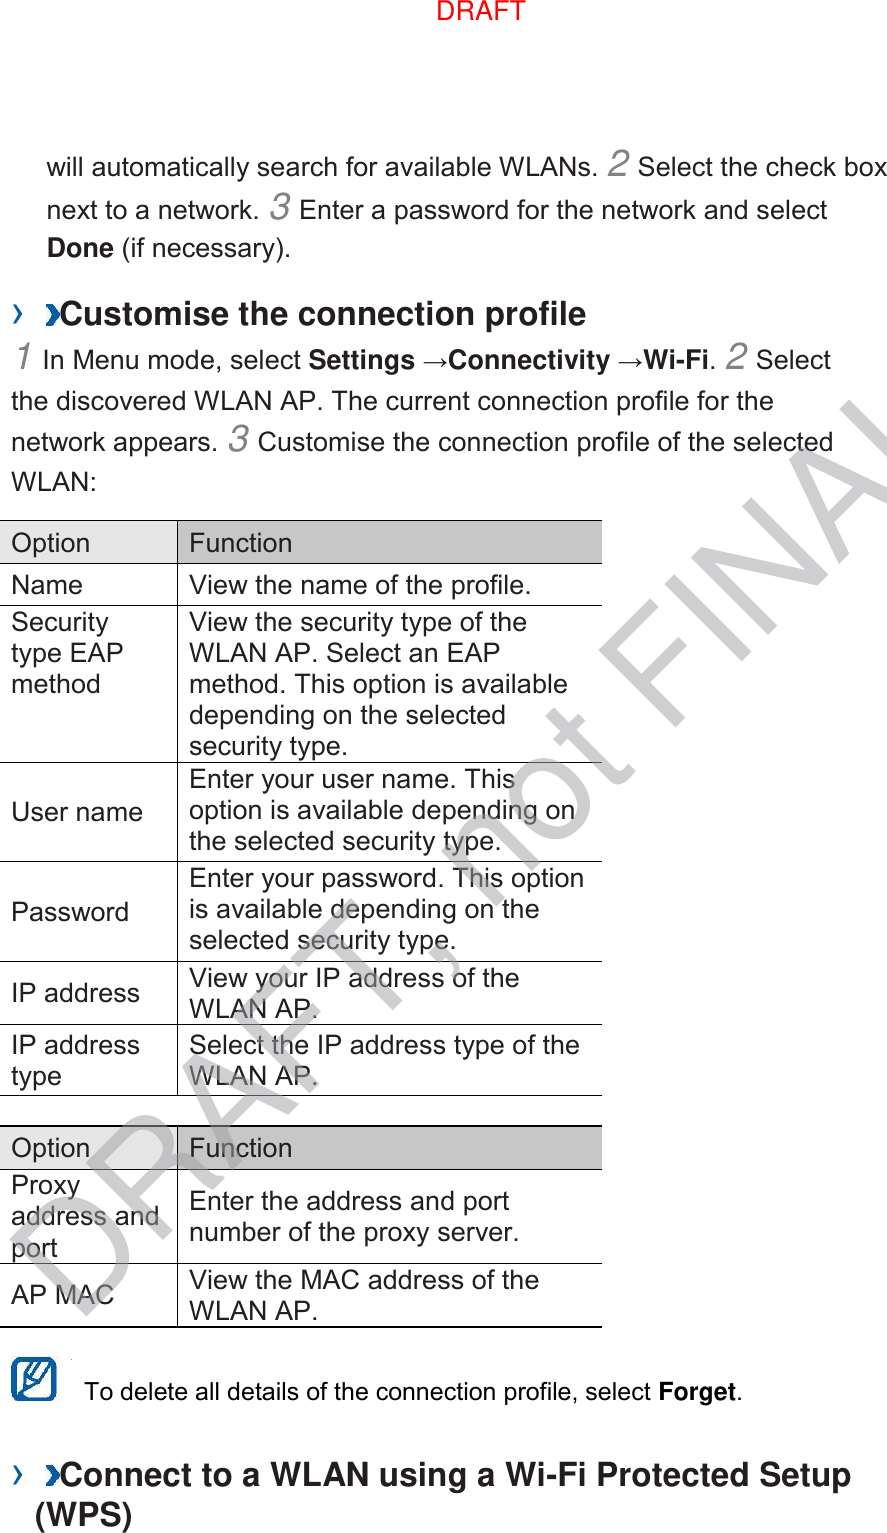 will automatically search for available WLANs. 2 Select the check box next to a network. 3 Enter a password for the network and select Done (if necessary).   ›  Customise the connection profile   1 In Menu mode, select Settings →Connectivity →Wi-Fi. 2 Select the discovered WLAN AP. The current connection profile for the network appears. 3 Customise the connection profile of the selected WLAN:   Option   Function   Name   View the name of the profile.   Security type EAP method   View the security type of the WLAN AP. Select an EAP method. This option is available depending on the selected security type.   User name   Enter your user name. This option is available depending on the selected security type.   Password   Enter your password. This option is available depending on the selected security type.   IP address   View your IP address of the WLAN AP.   IP address type   Select the IP address type of the WLAN AP.    Option   Function   Proxy address and port   Enter the address and port number of the proxy server.   AP MAC   View the MAC address of the WLAN AP.      To delete all details of the connection profile, select Forget.   ›  Connect to a WLAN using a Wi-Fi Protected Setup (WPS)   DRAFT, not FINALDRAFT